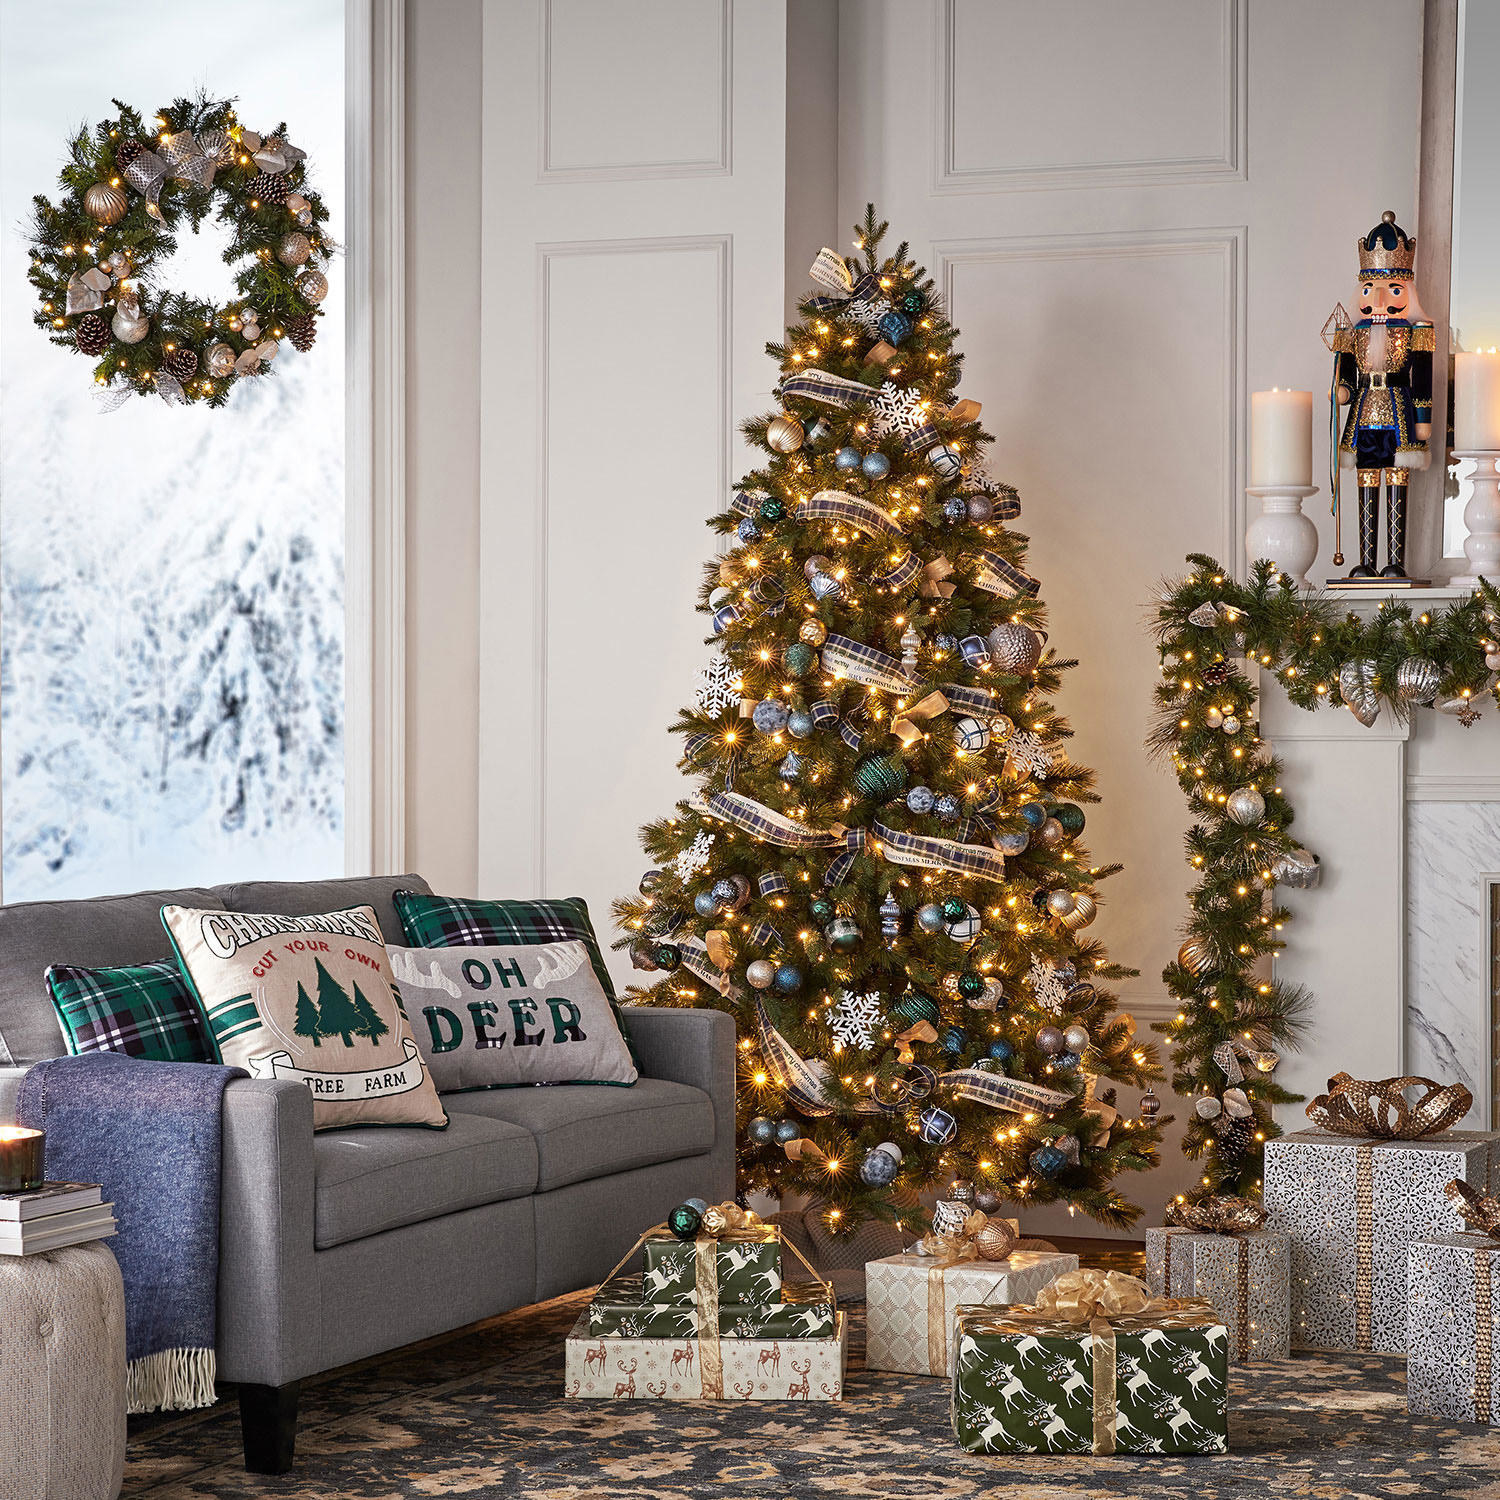 Lifestyle image of Christmas tree in a decorated home